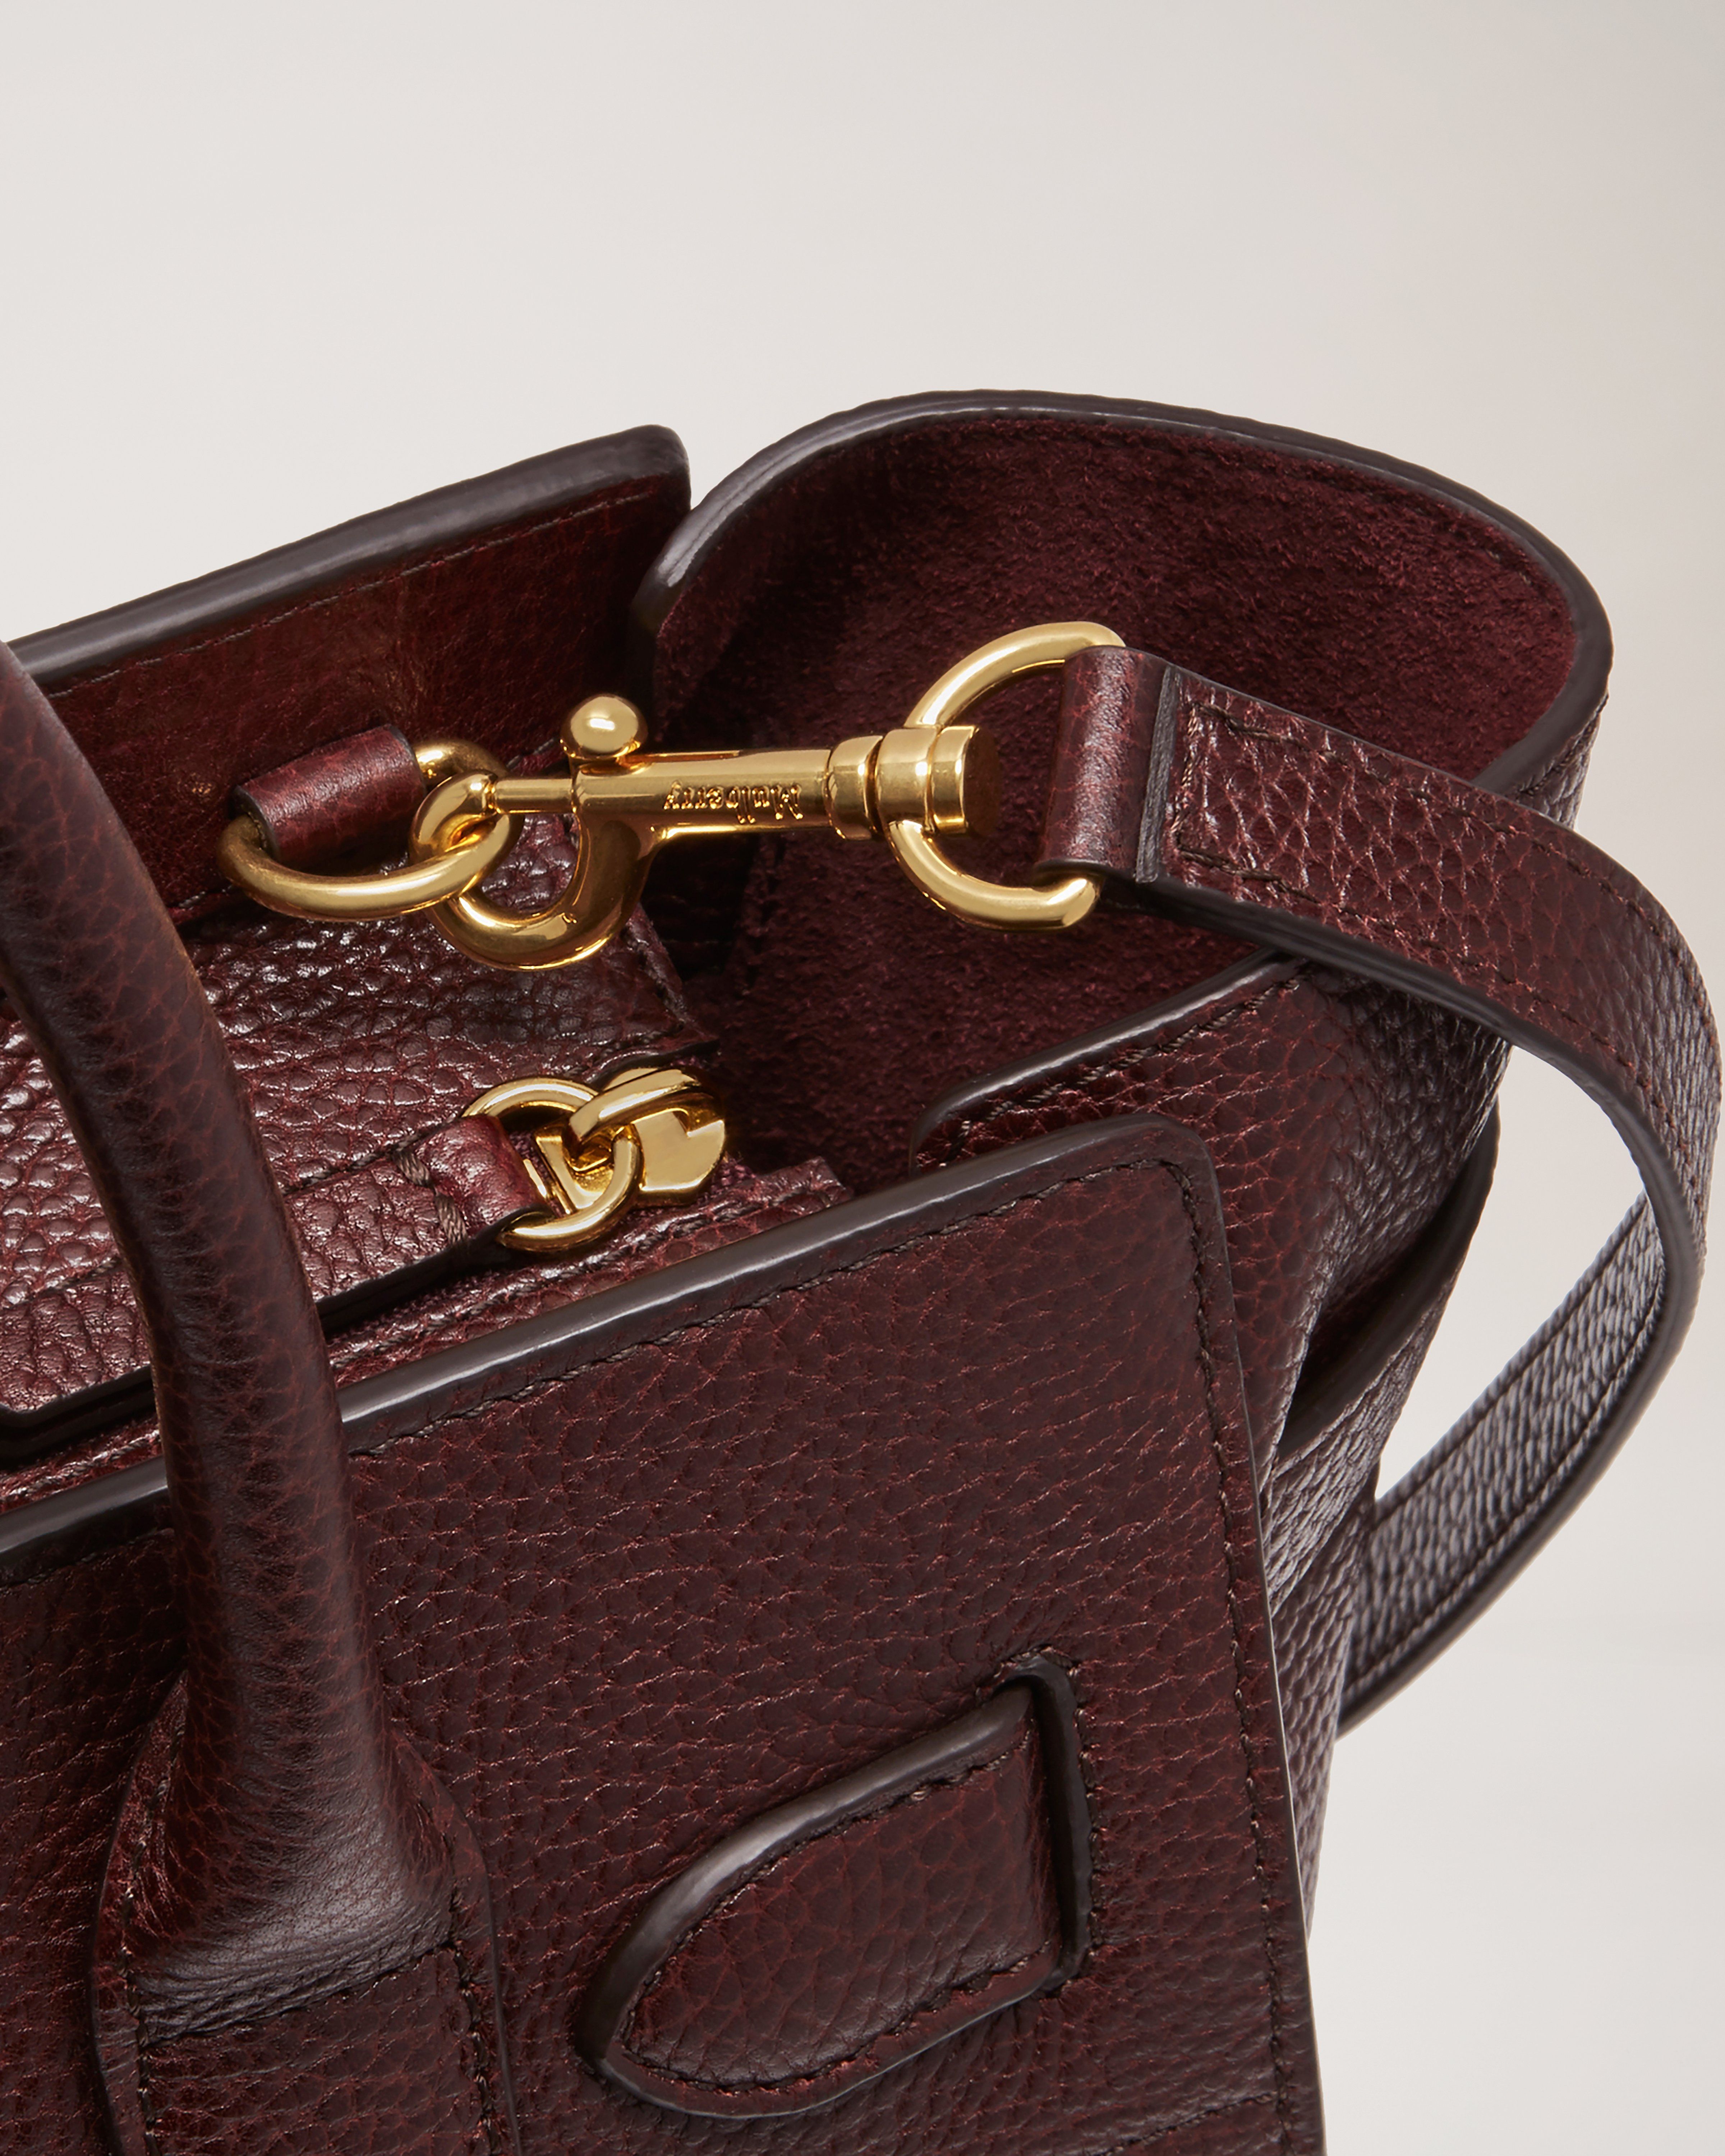 Small Zipped Bayswater | Oxblood Small Classic Grain | Women | Mulberry